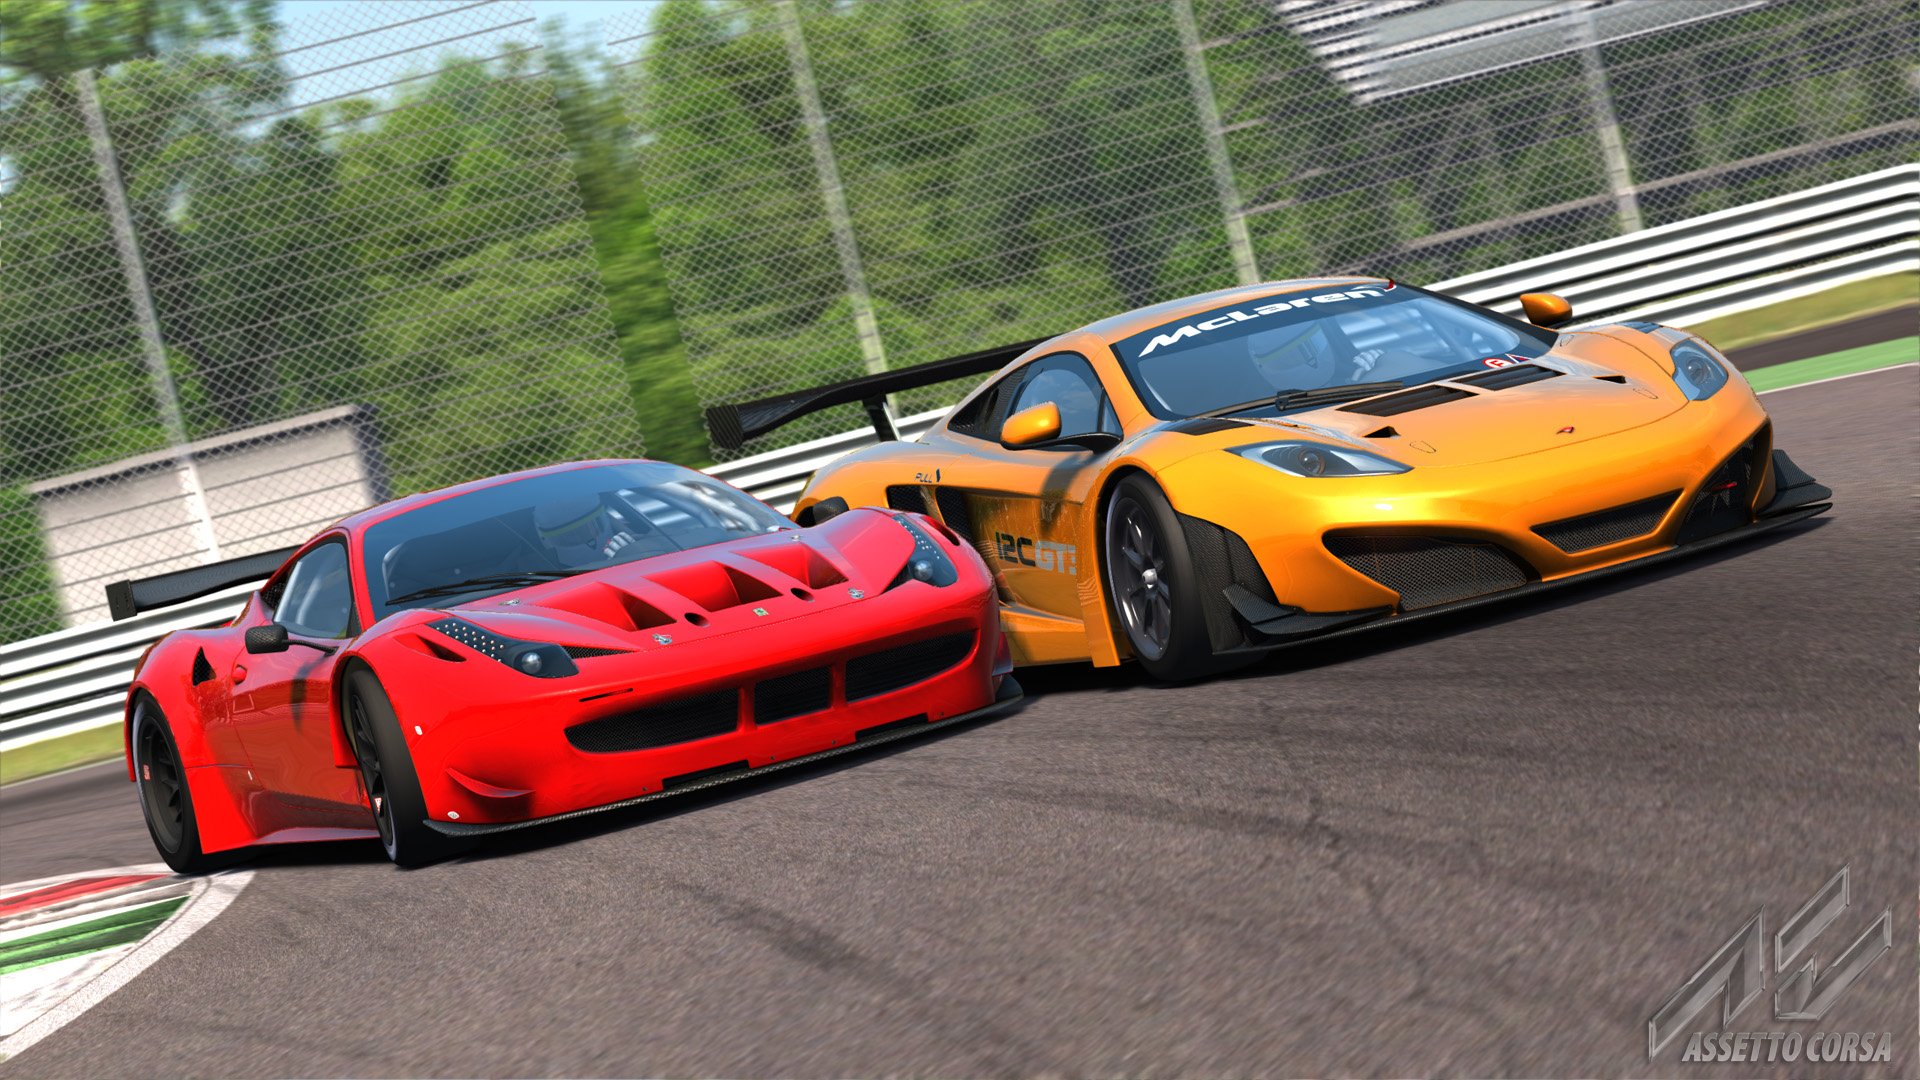 More information about "Assetto Corsa Ultimate Edition per Playstation 4 - XBox One"